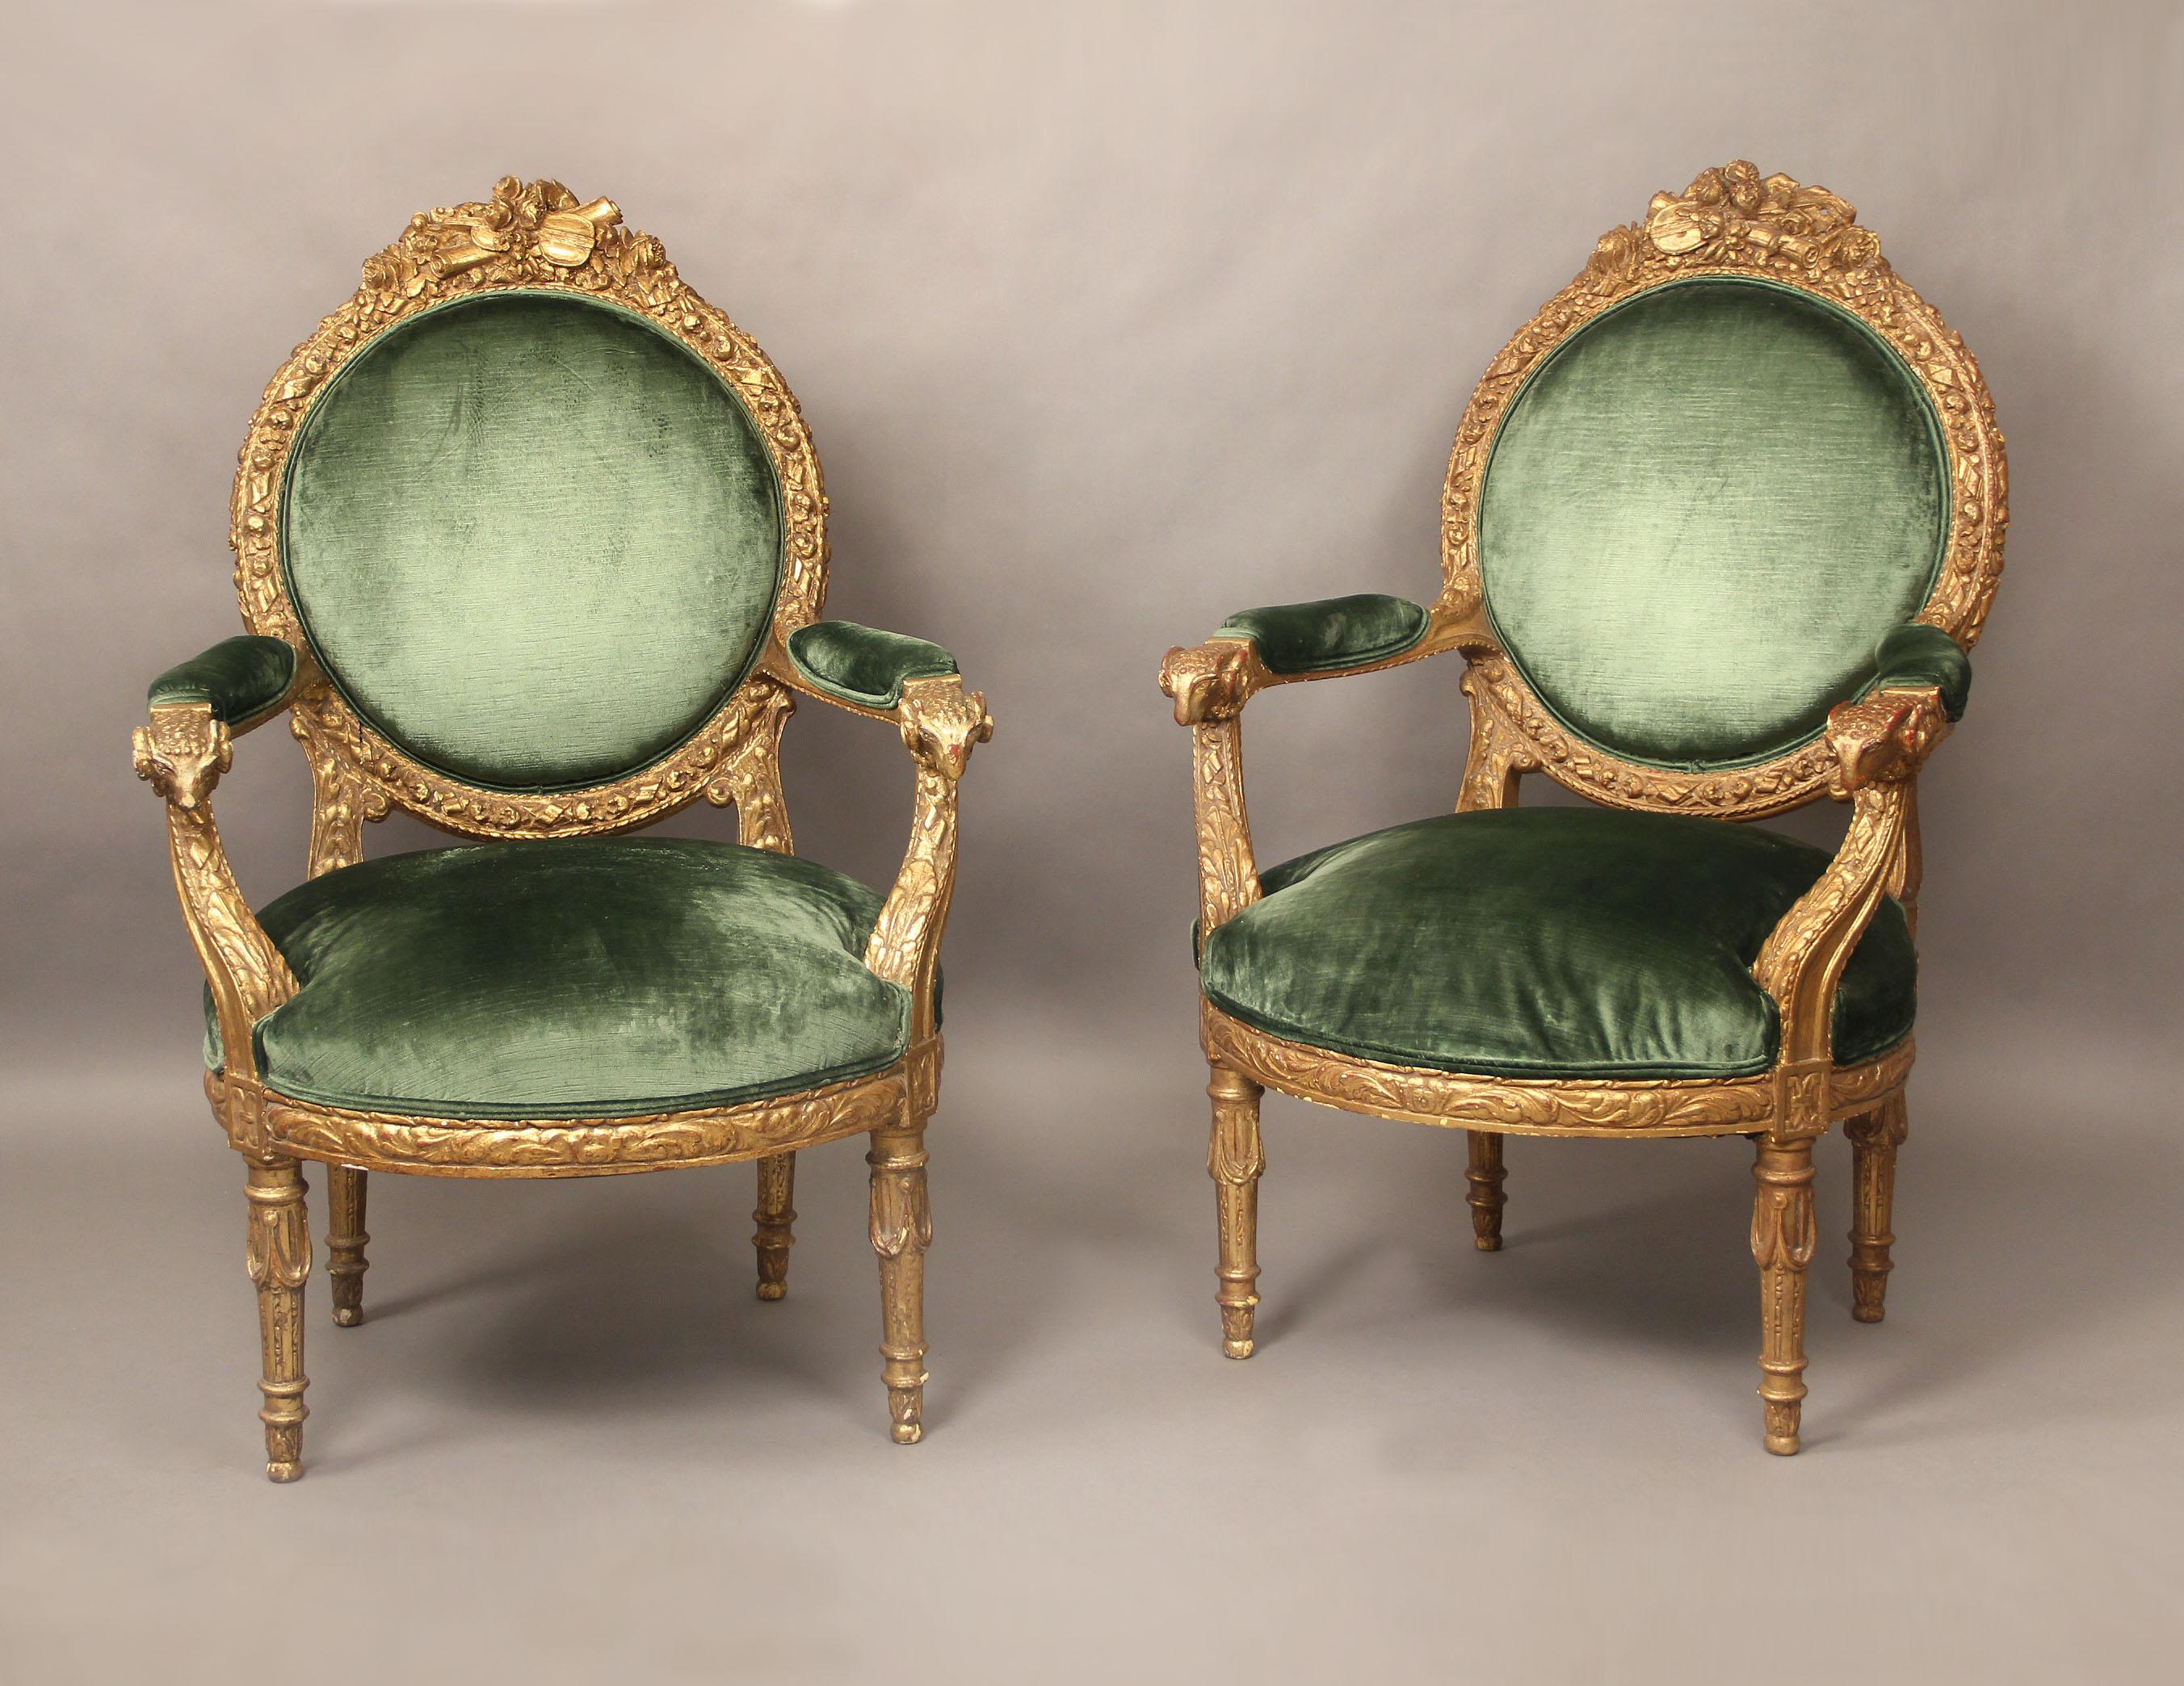 A very fine pair of late 19th century Louis XVI style giltwood armchairs.

Oversized with high backs, floral carved frames with instruments on top and ram's head on the arms.